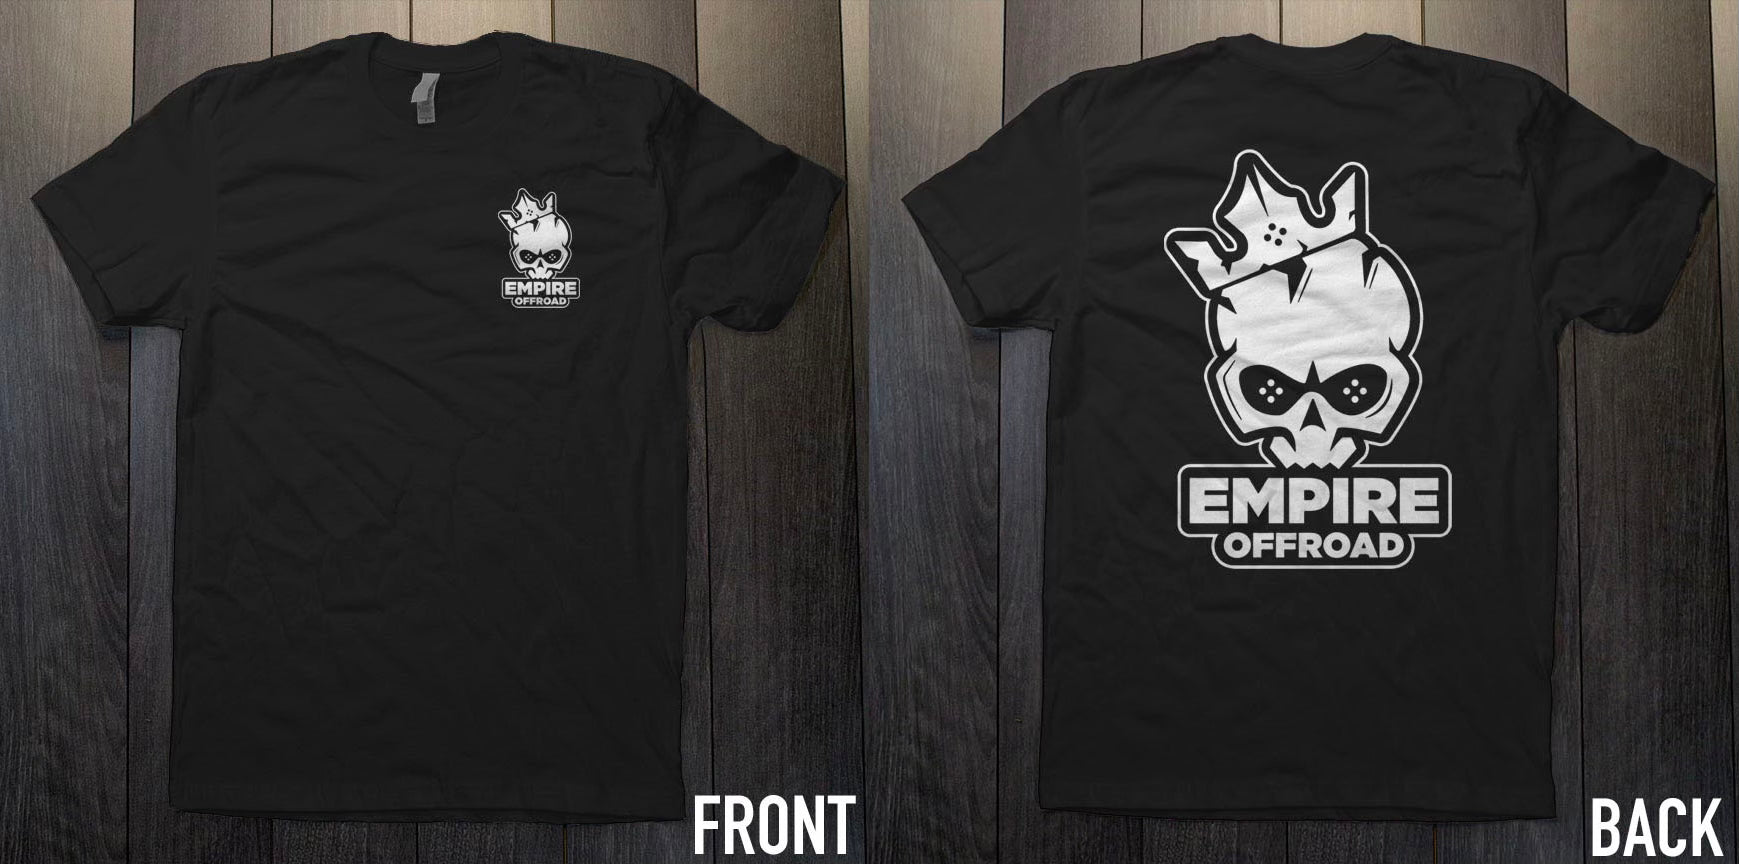 Empire T Shirt (Black or Pink)